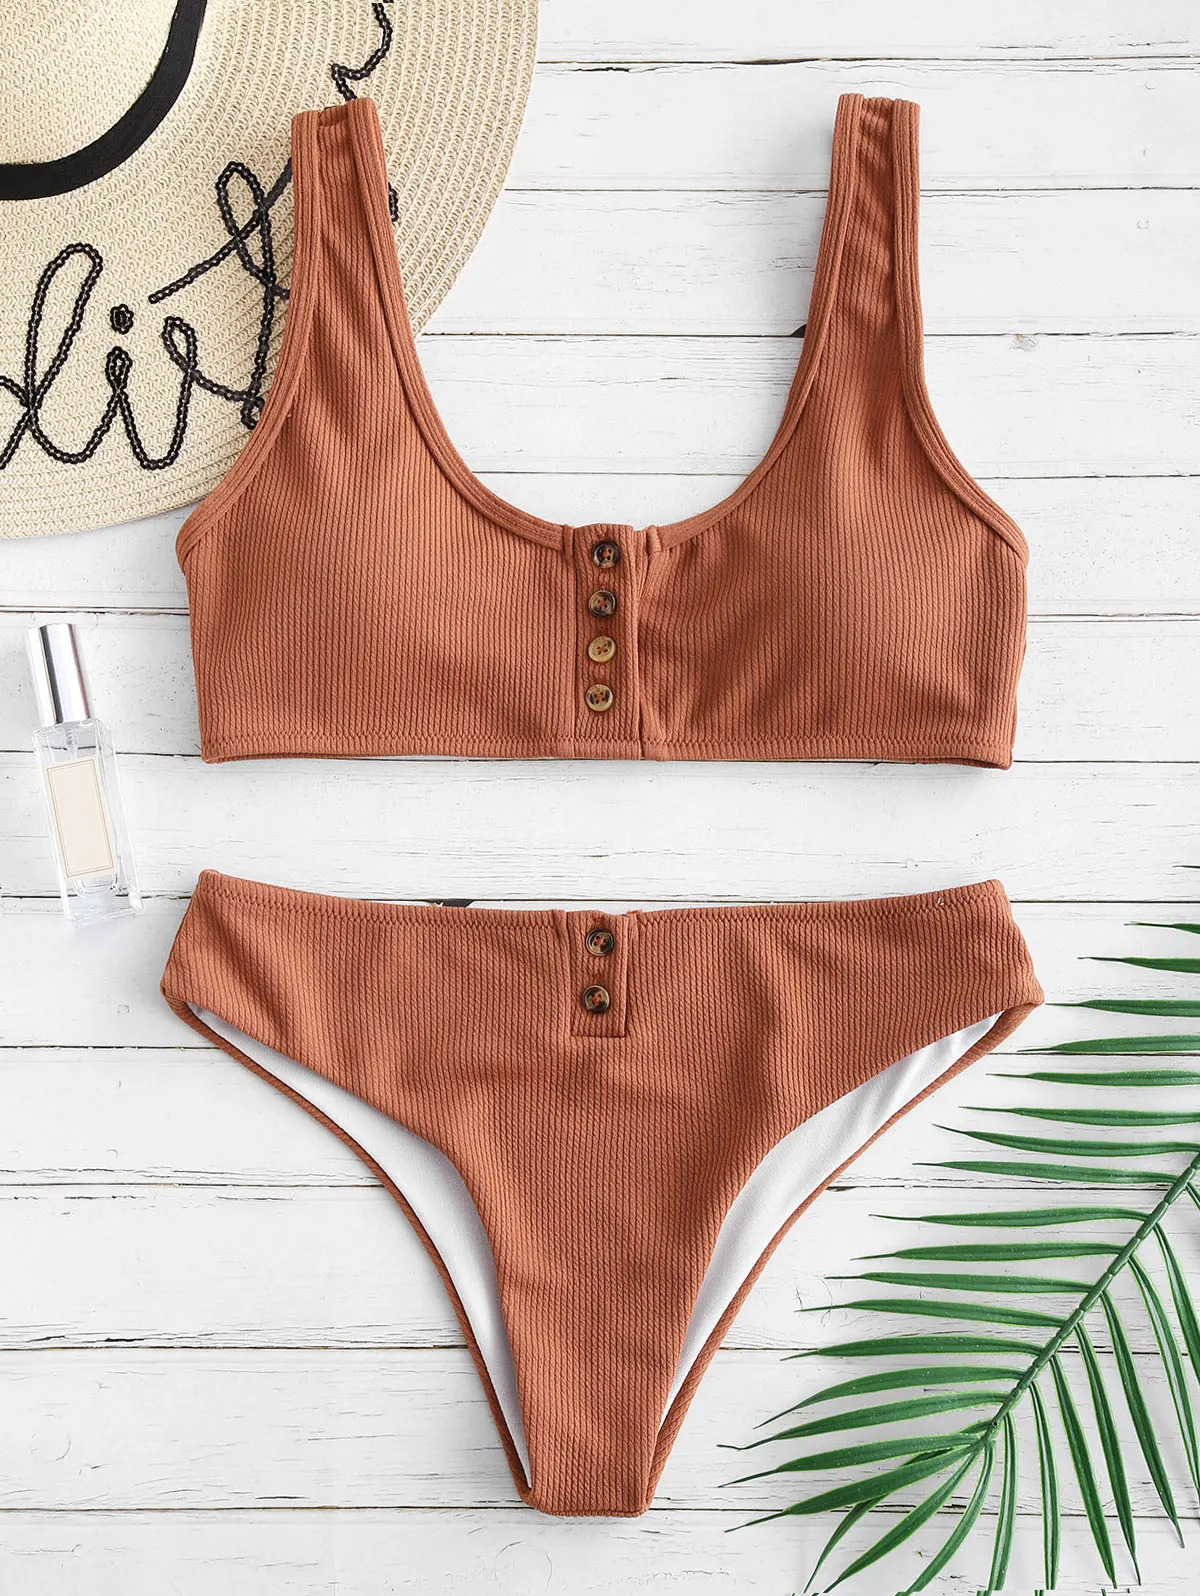 

ZAFUL Bikini Set Padded Ribbed Texture Buttons Scoop Neck Top And Natural Waist Bottoms Simple Sexy Swimwear Women Padded Suit